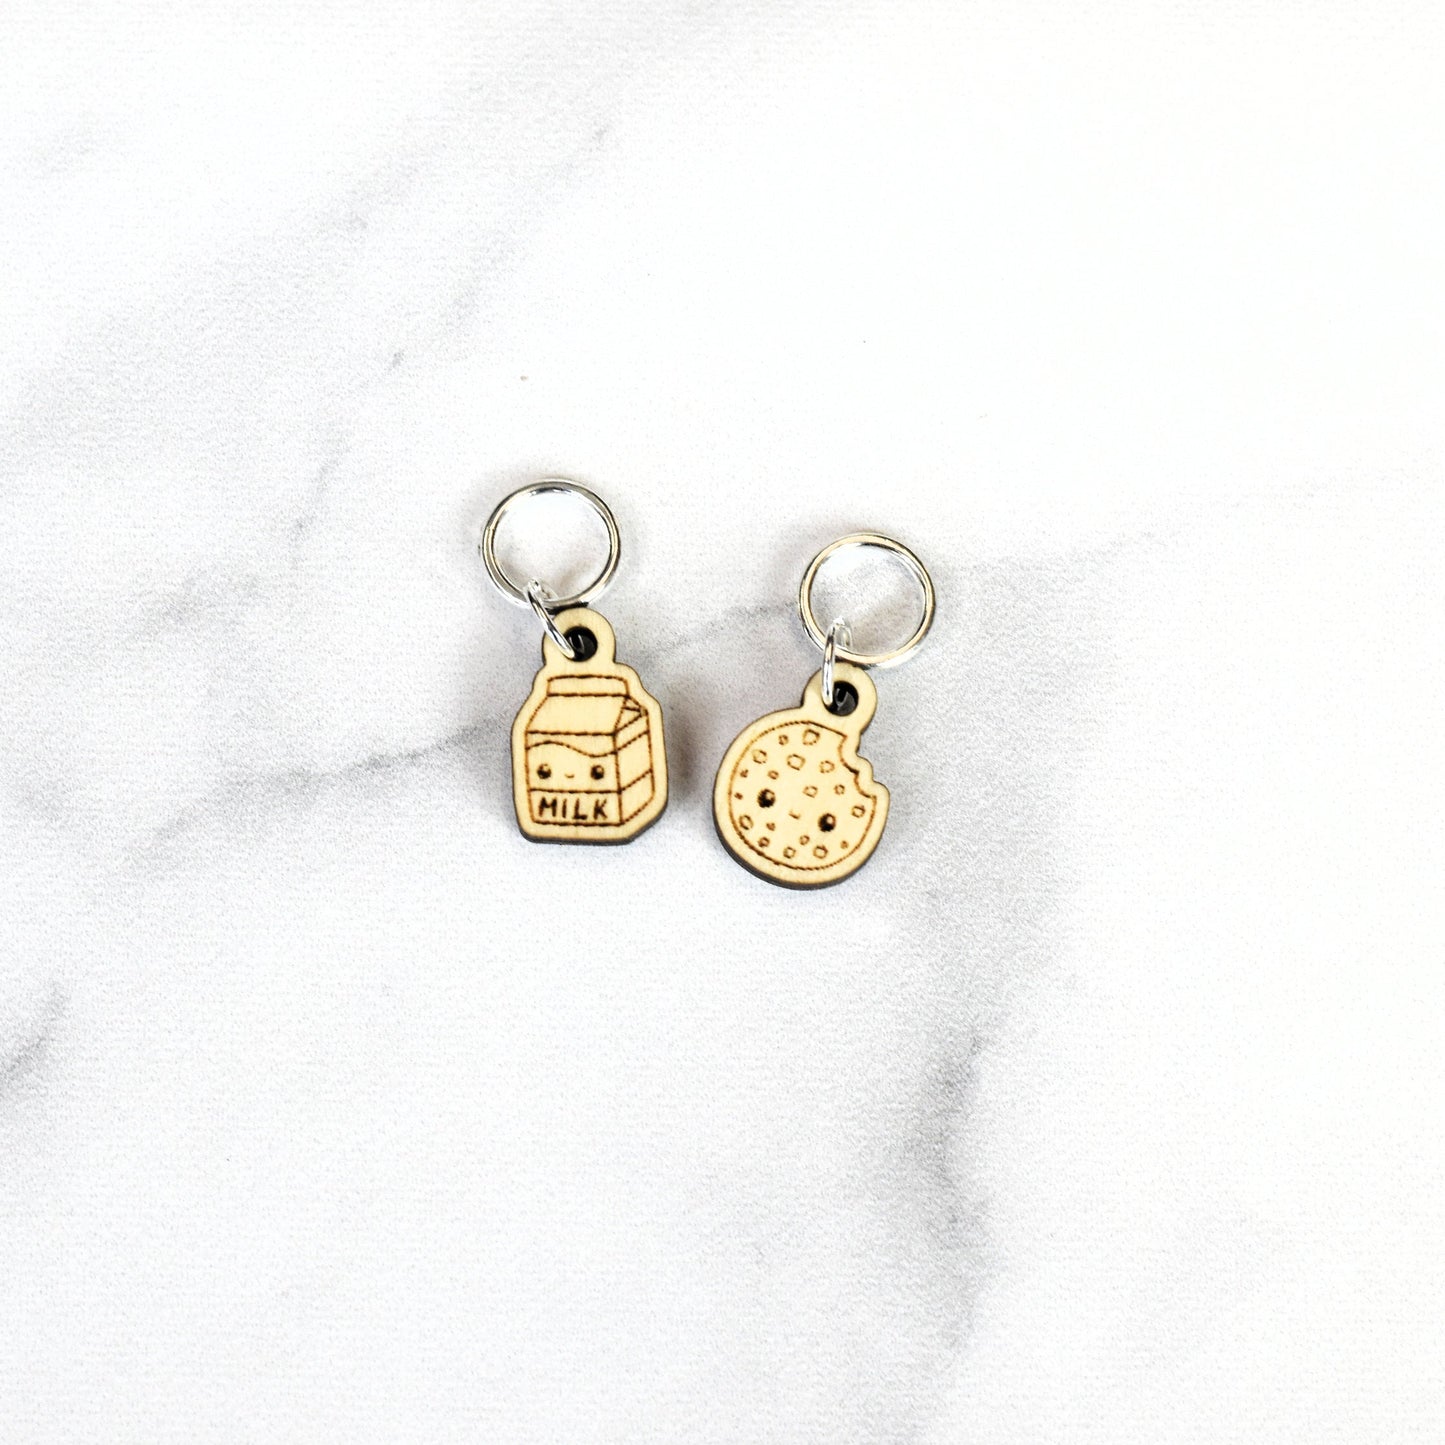 Set of 2 laser Engraved Stitch Markers - Kawaii Milk and Cookie